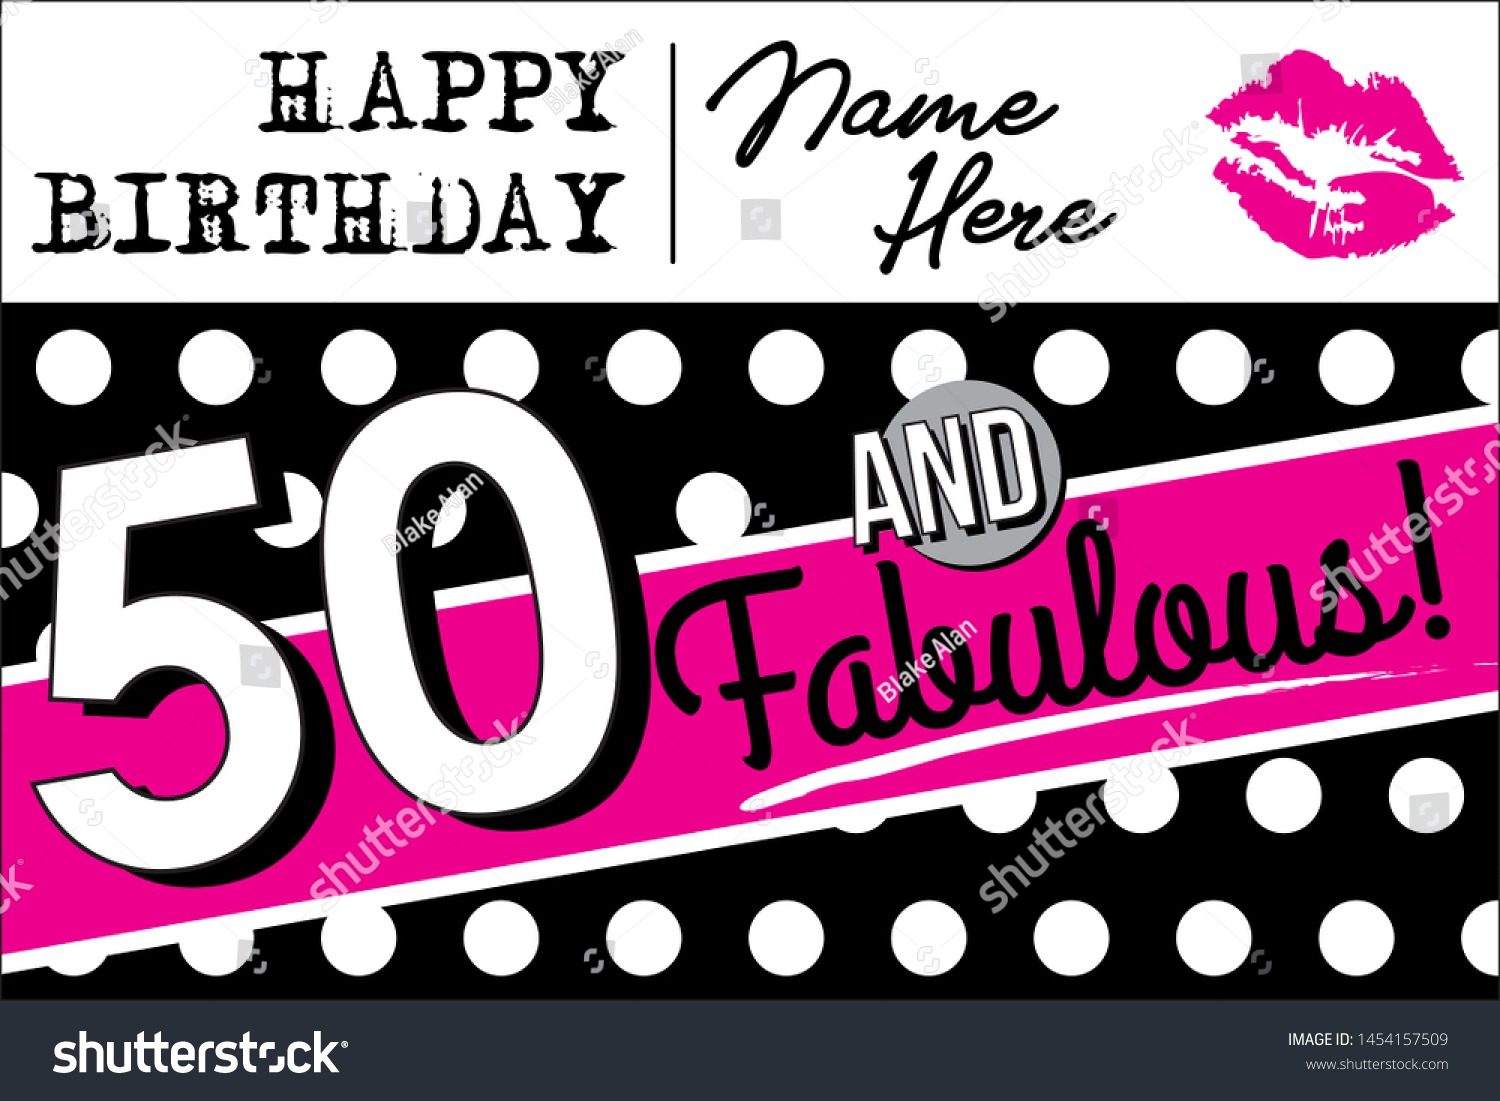 SVG of 50 and Fabulous Birthday Card, Invitation or Poster Template | Pink and Black 50th Birthday Celebration Sign | Vector Graphic for Banners, Flyers or Social Media Use | B-Day Signage svg